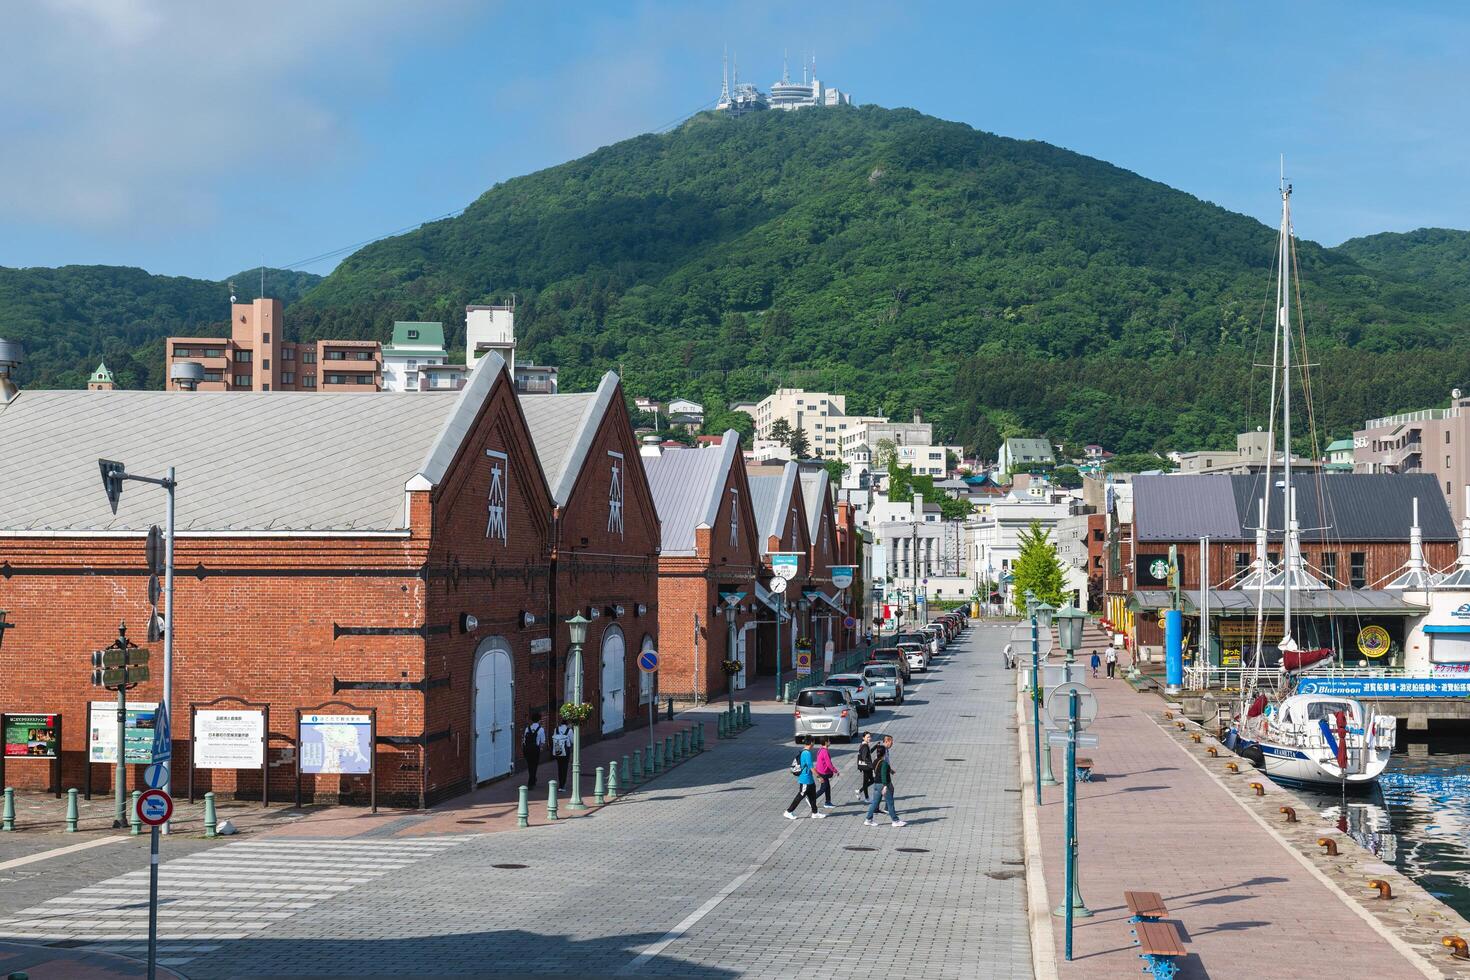 Kanemori Red Brick Warehouse, built in 1909 was the first commercial warehouse in Hakodate, Hokkaido, Japan. Now it is a commercial complex consisting of four facilities. photo